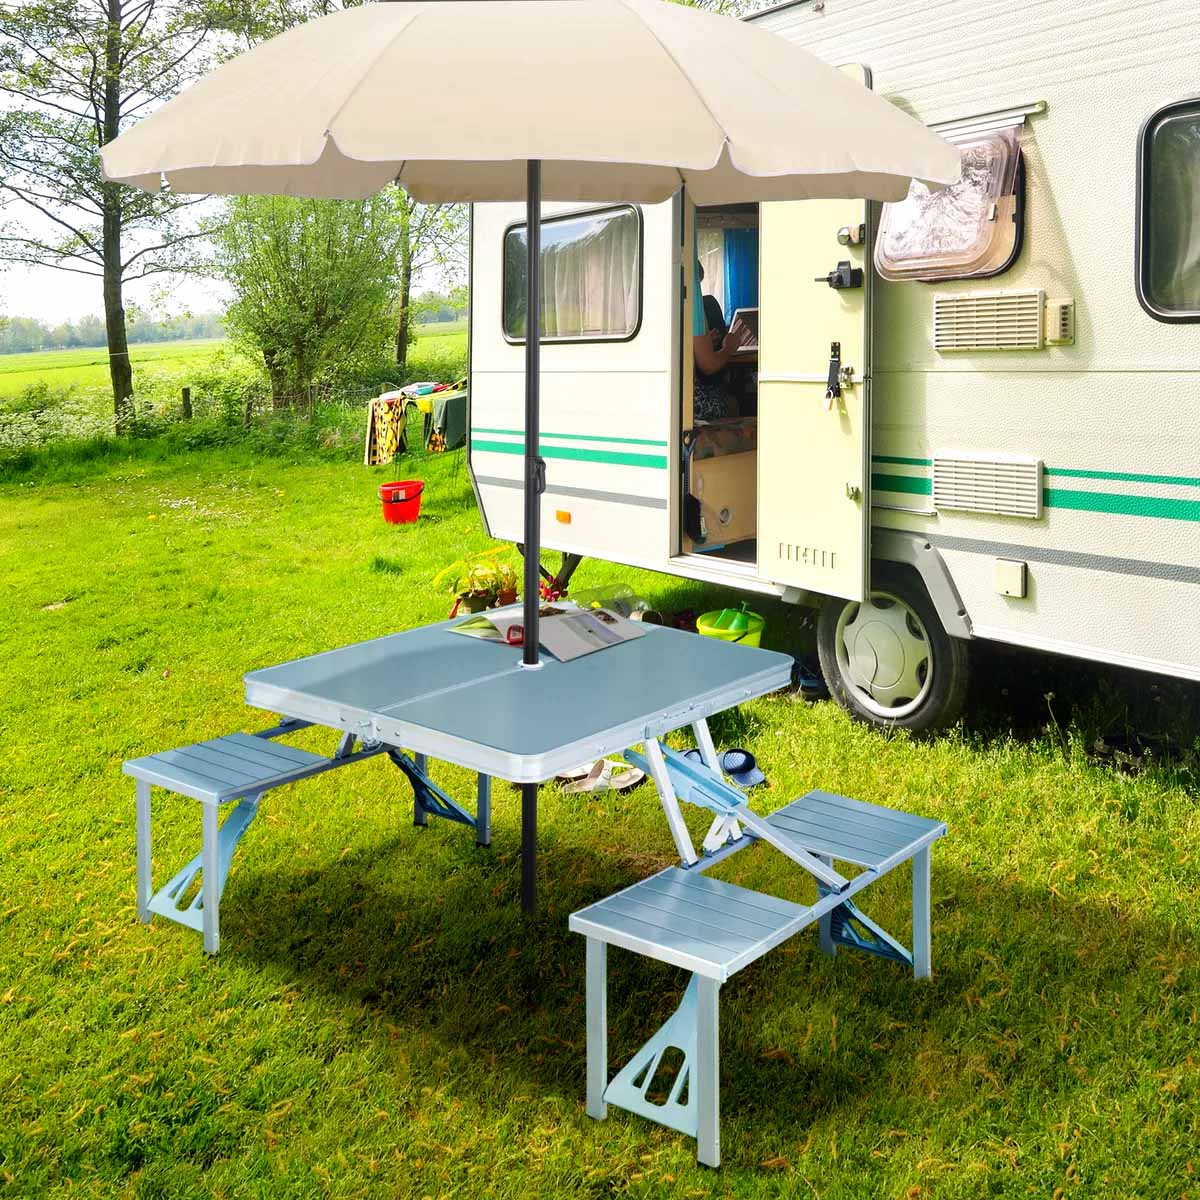 10 Best Picnic Table With Umbrella For 2023 1703755592 